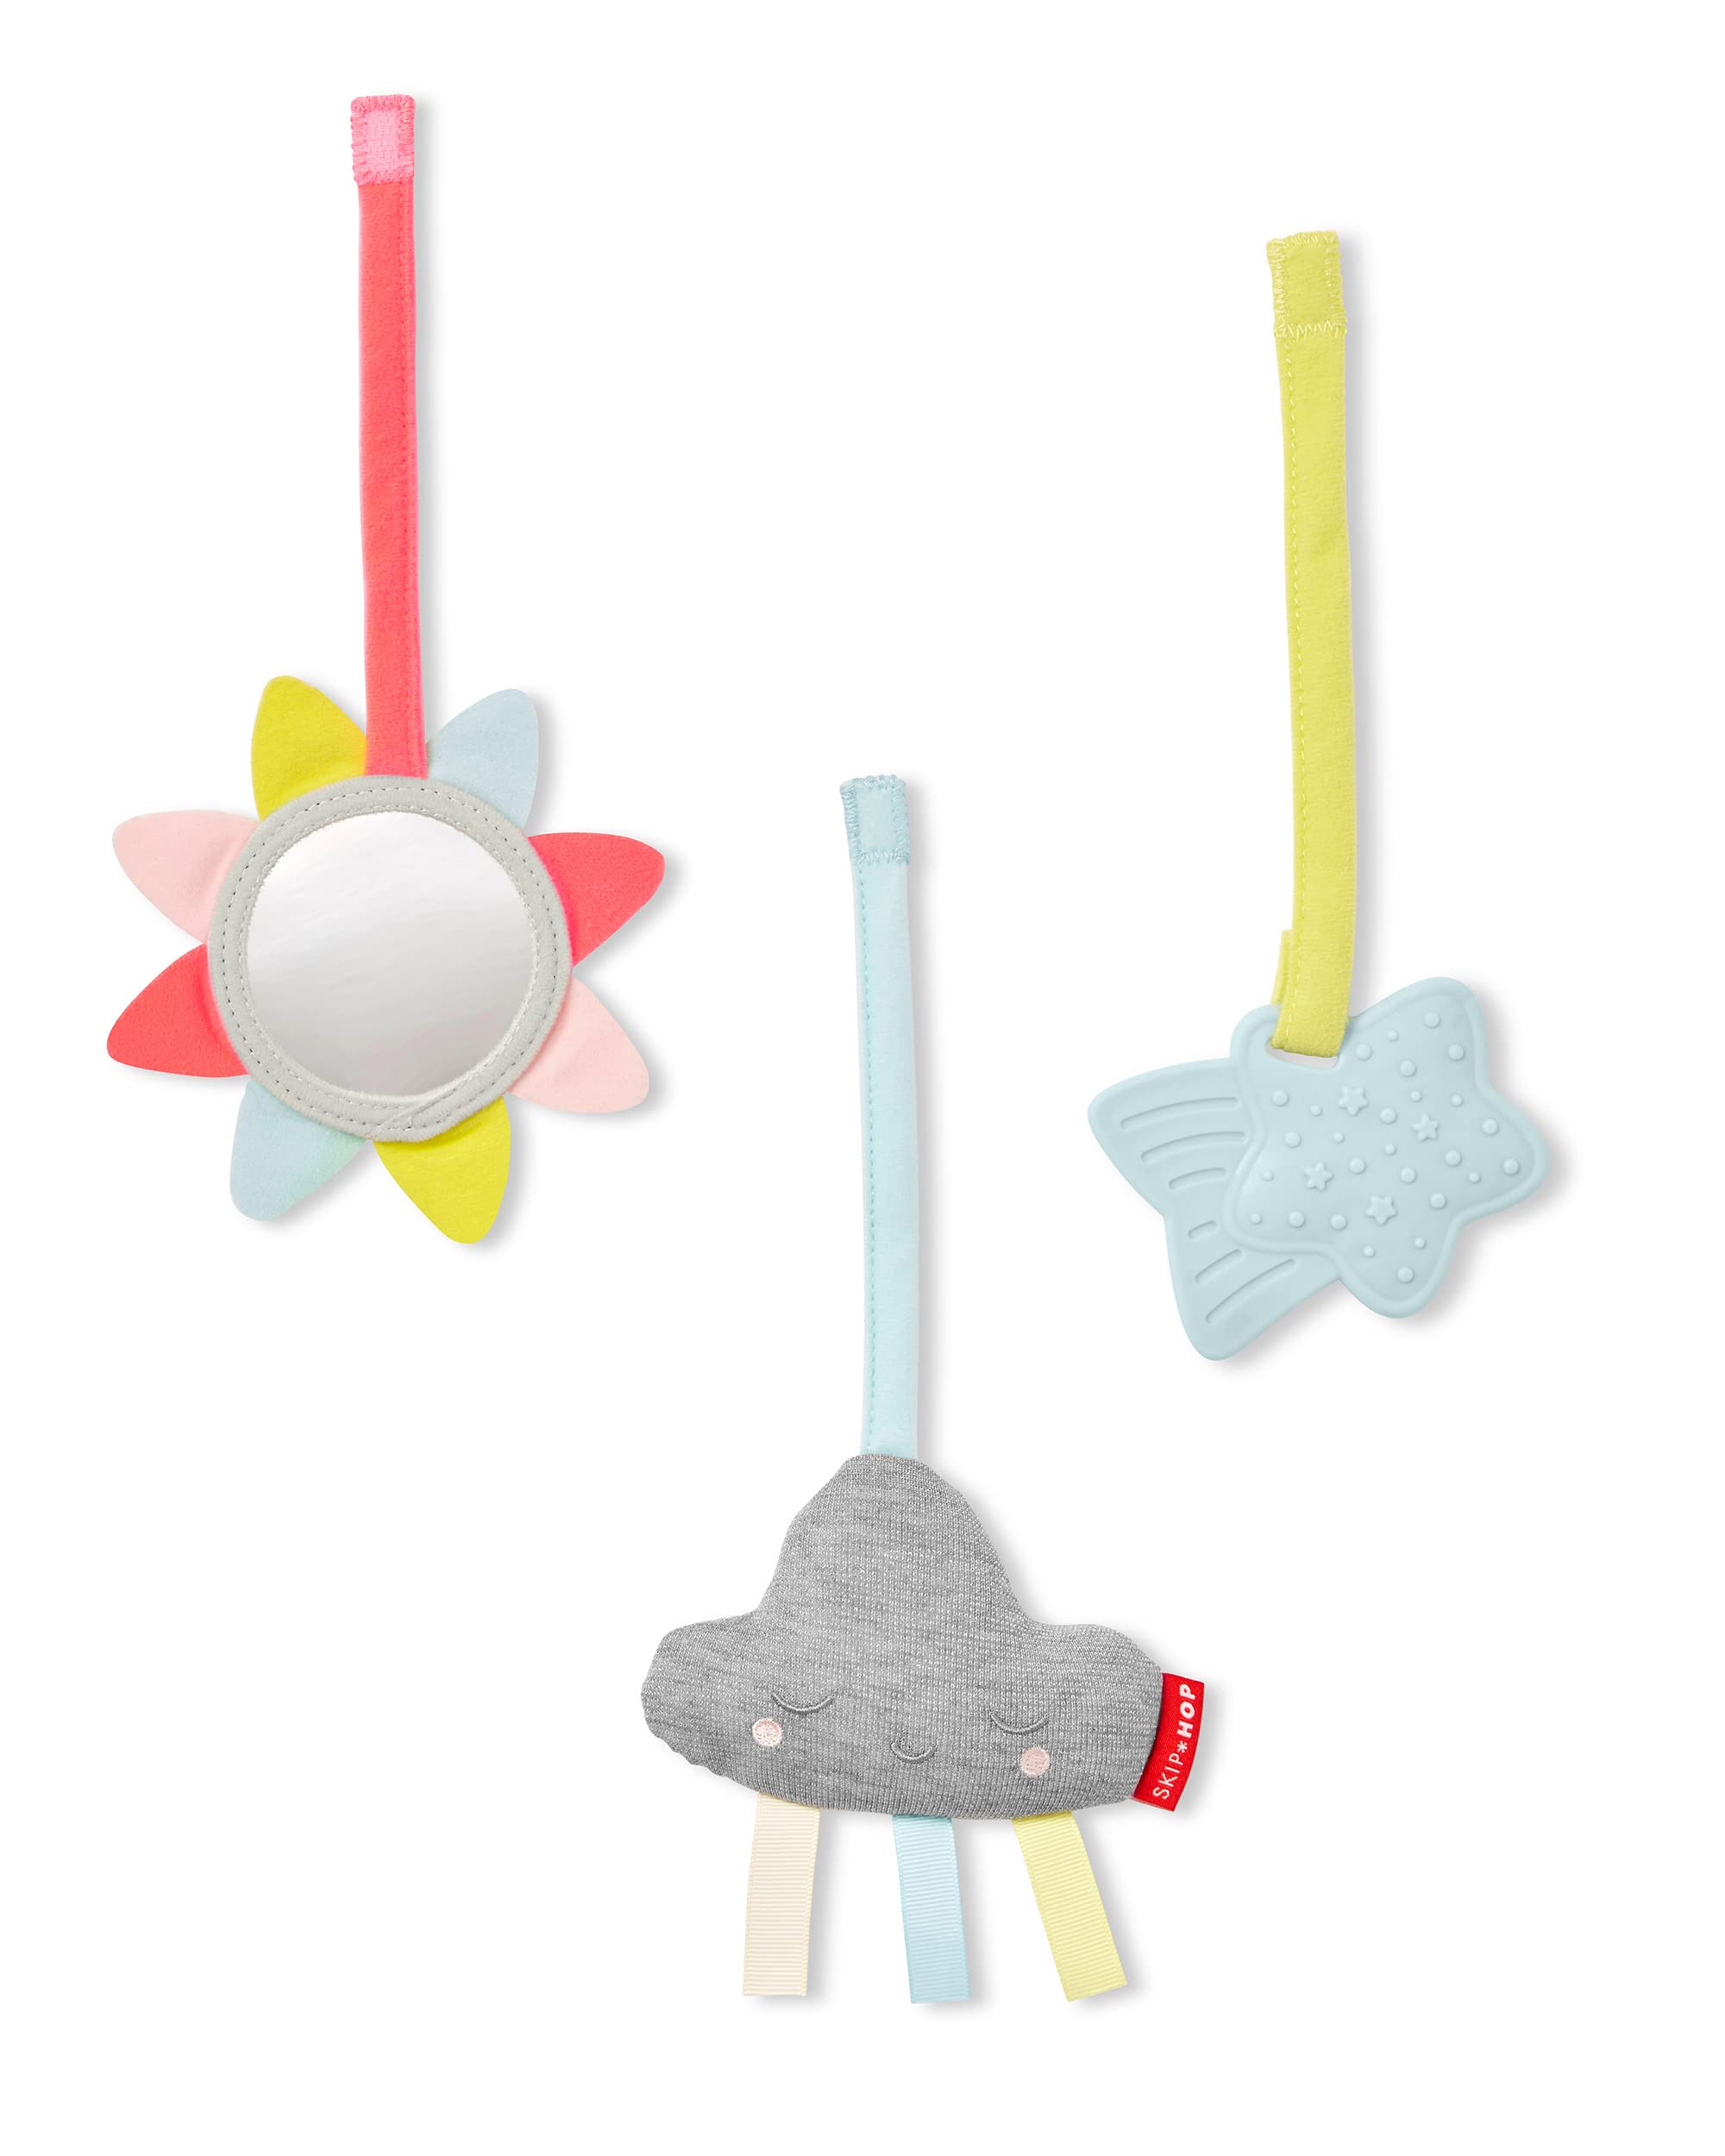 Skip Hop Wooden Baby Gym, Silver Lining Cloud Activity Gym